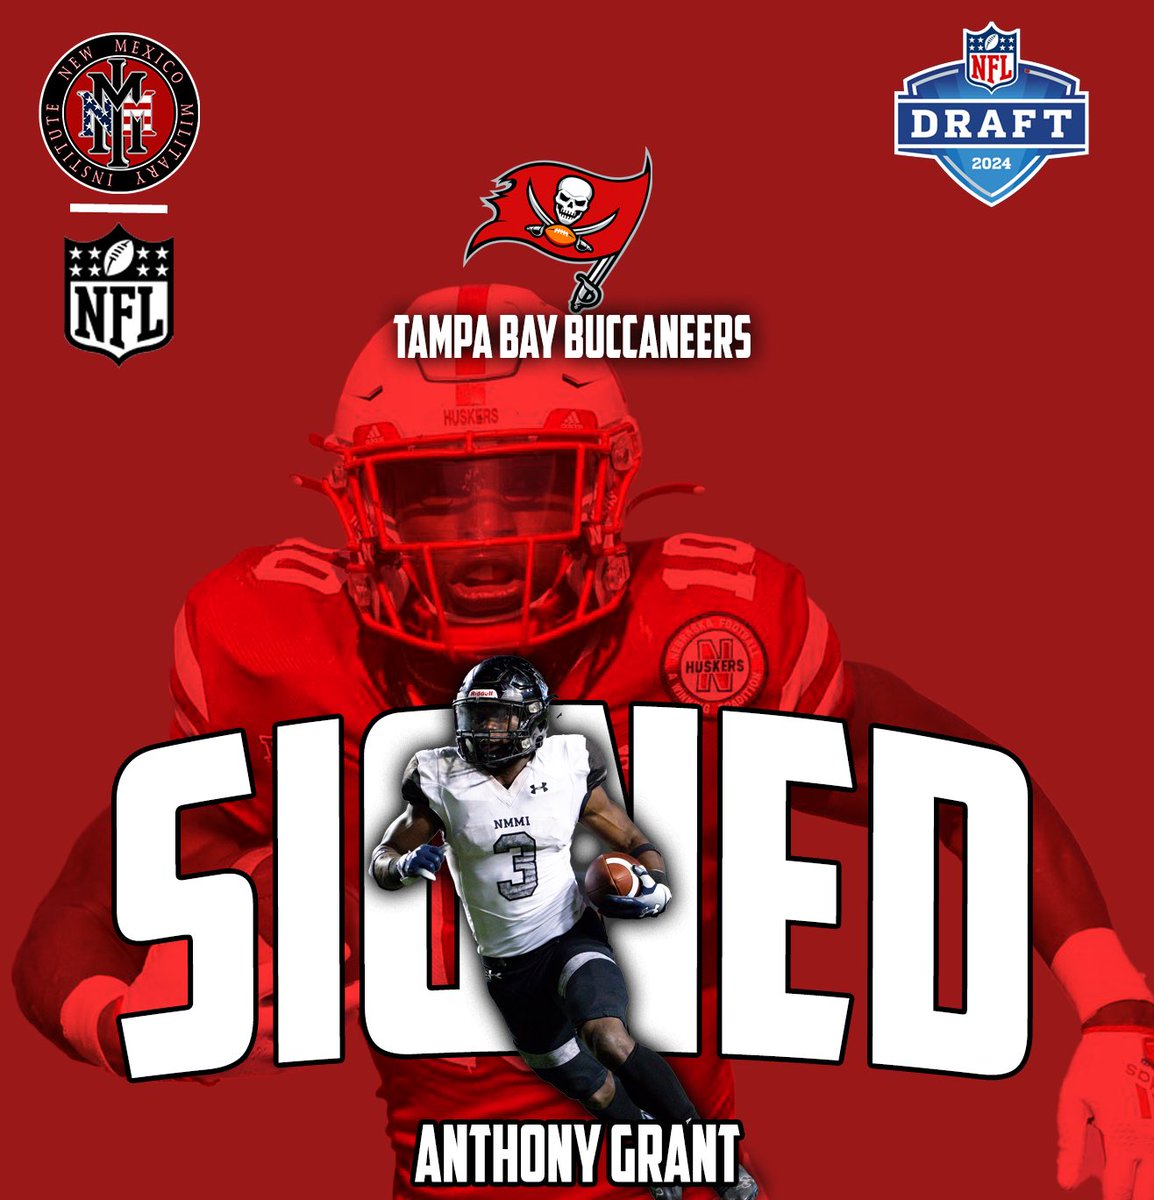 Congratulations @Grant4Anthony !! Tampa Bay thank you for giving this kid the opportunity of a lifetime!! @nmmibroncos ➡️ @HuskerFootball ➡️ @Buccaneers #GRINDHOUSE